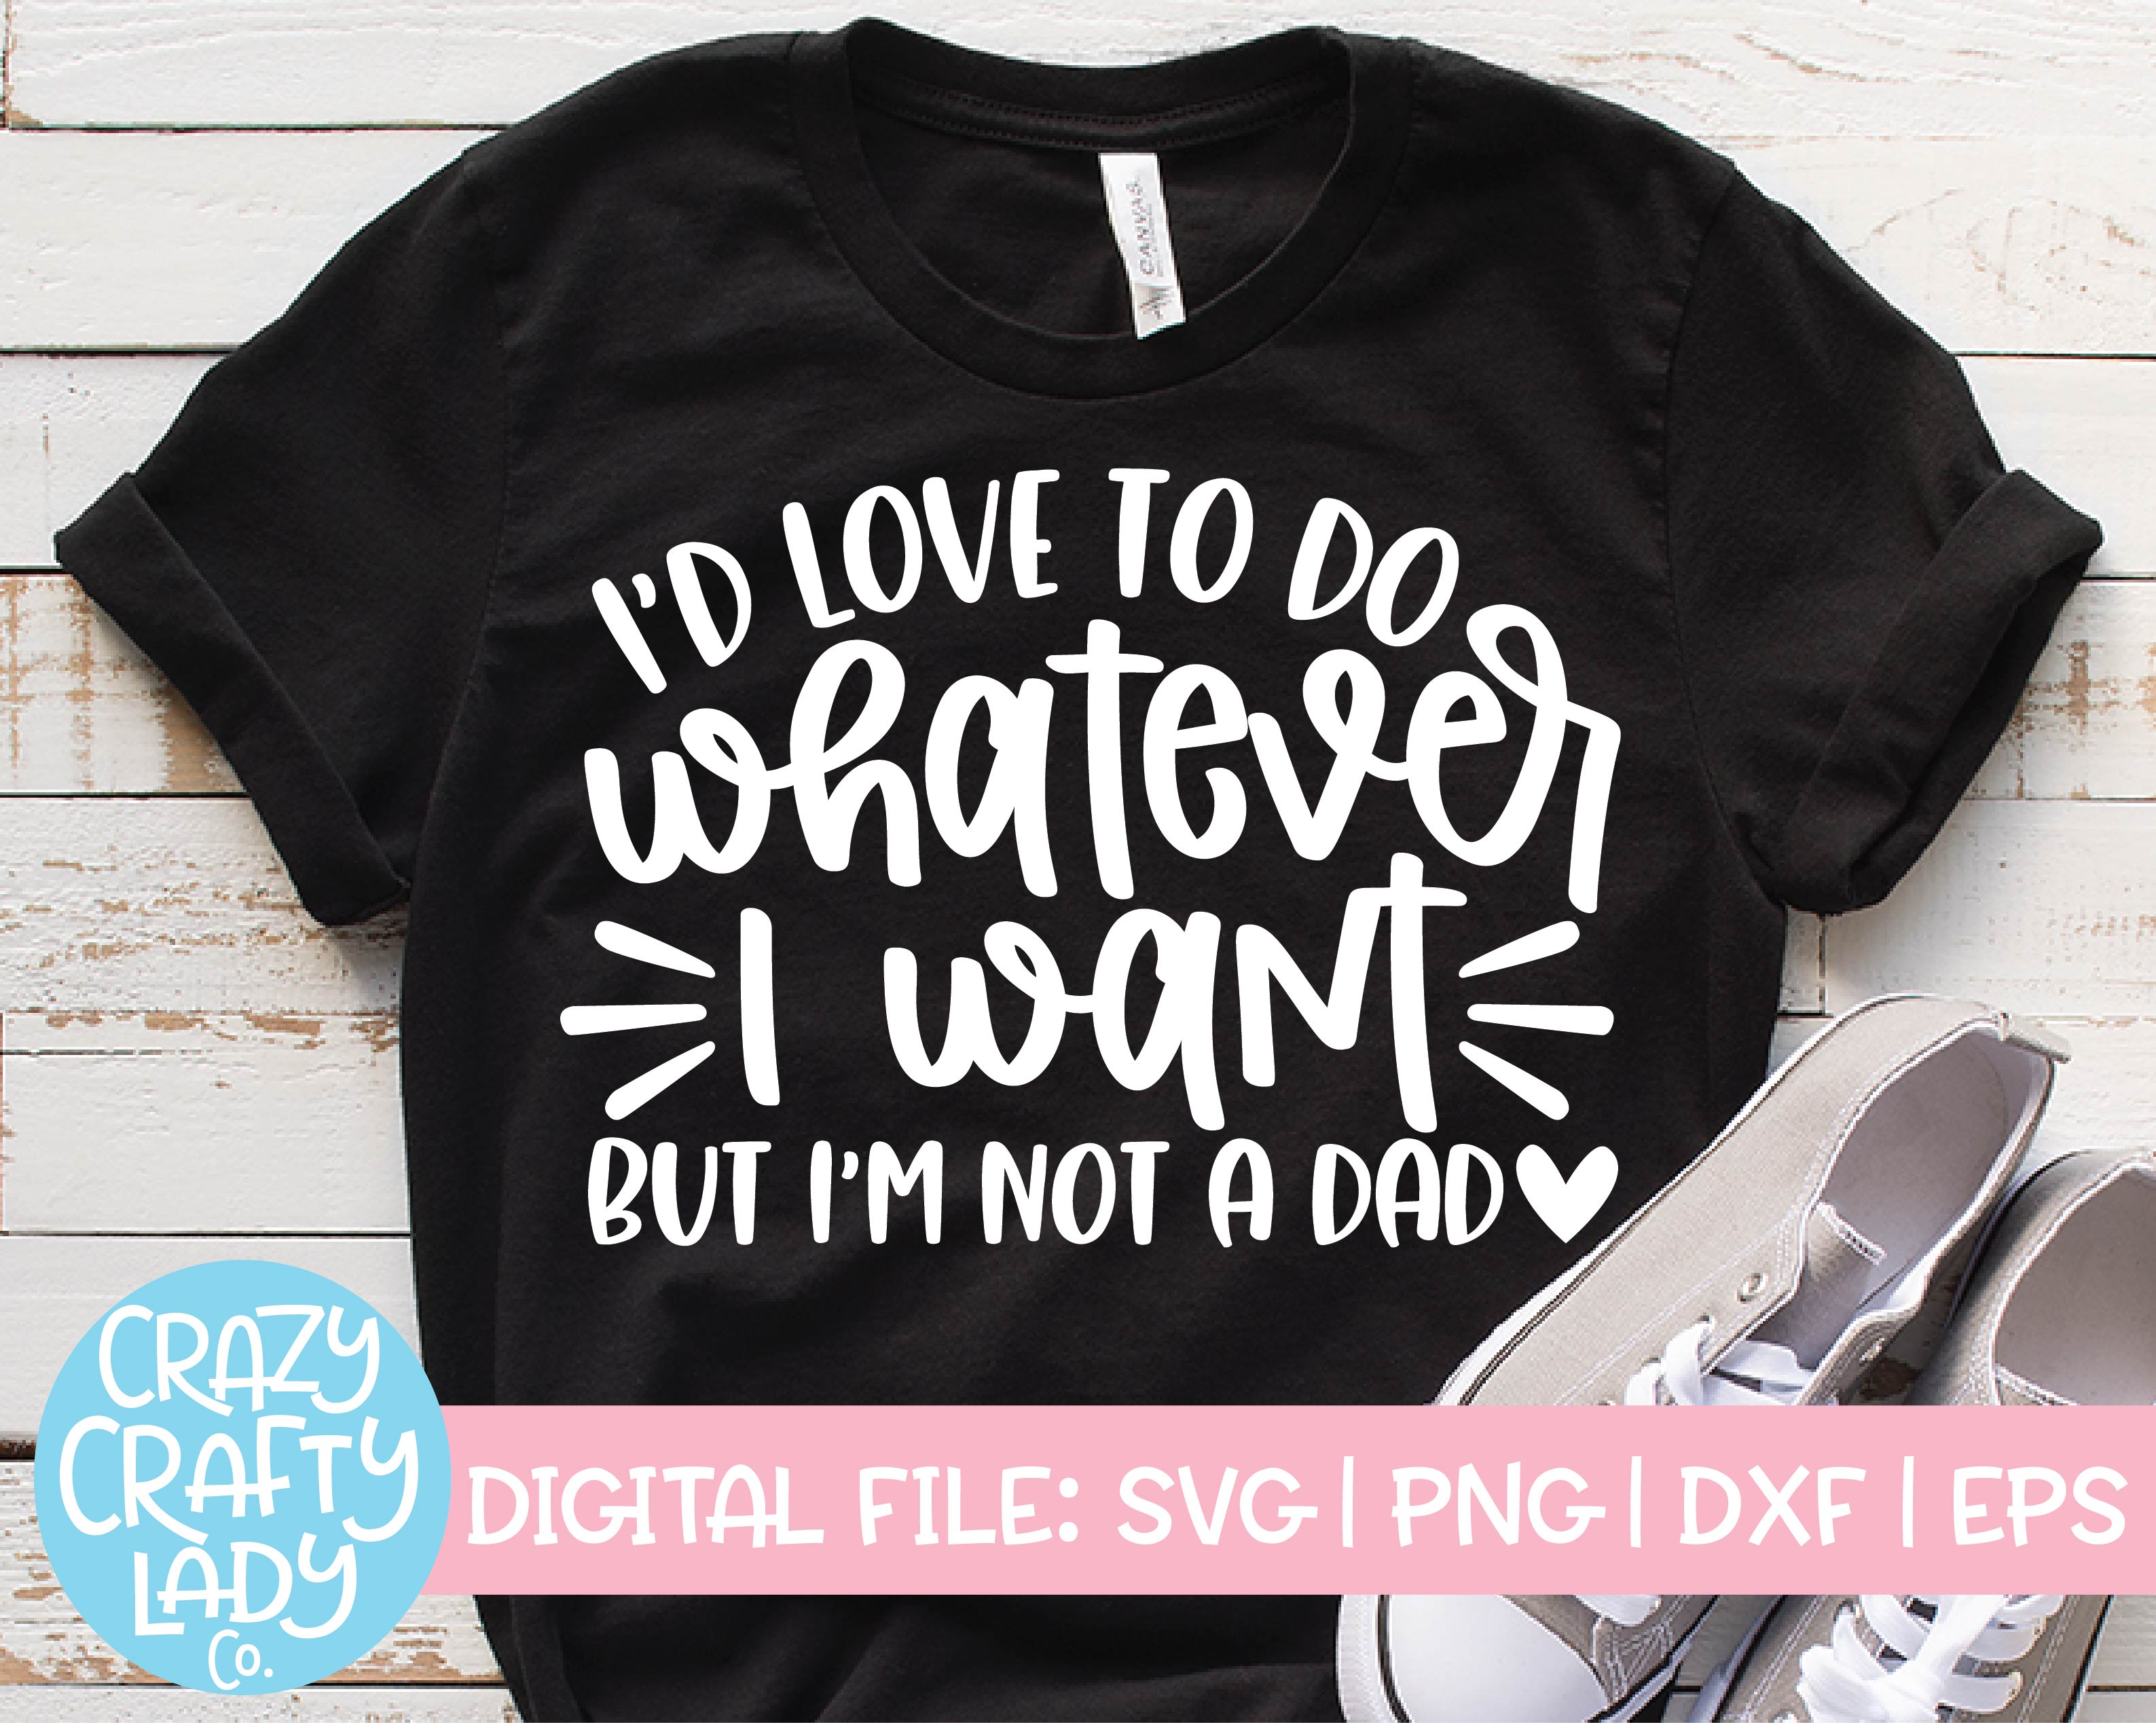 Download I D Love To Do Whatever I Want But I M Not A Dad Svg Cut File Crazy Crafty Lady Co